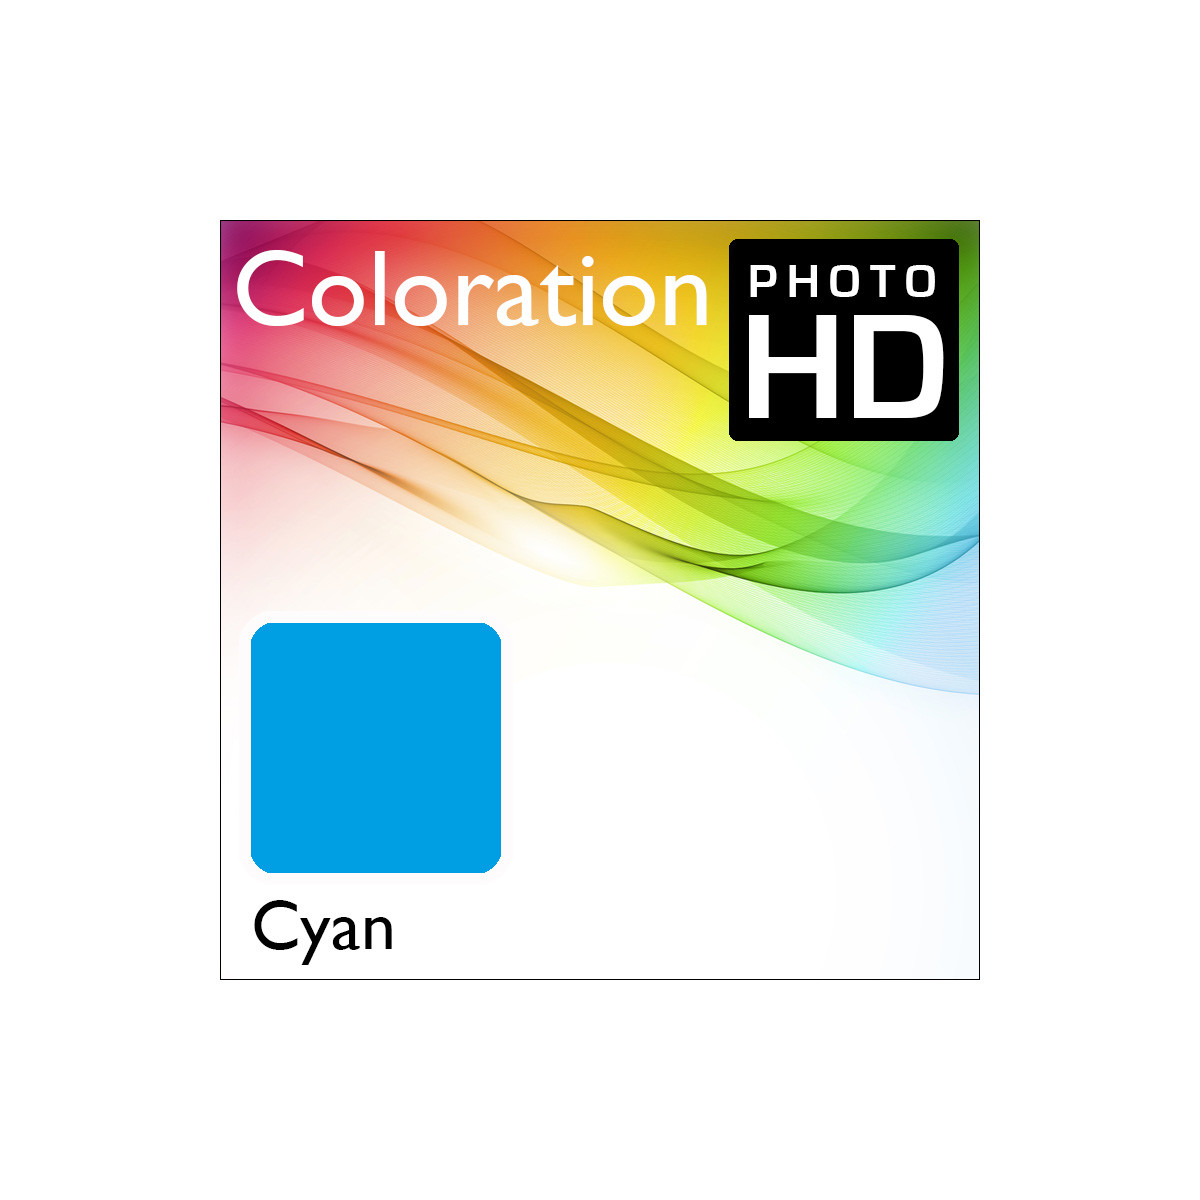 Coloration PhotoHD Flasche Cyan